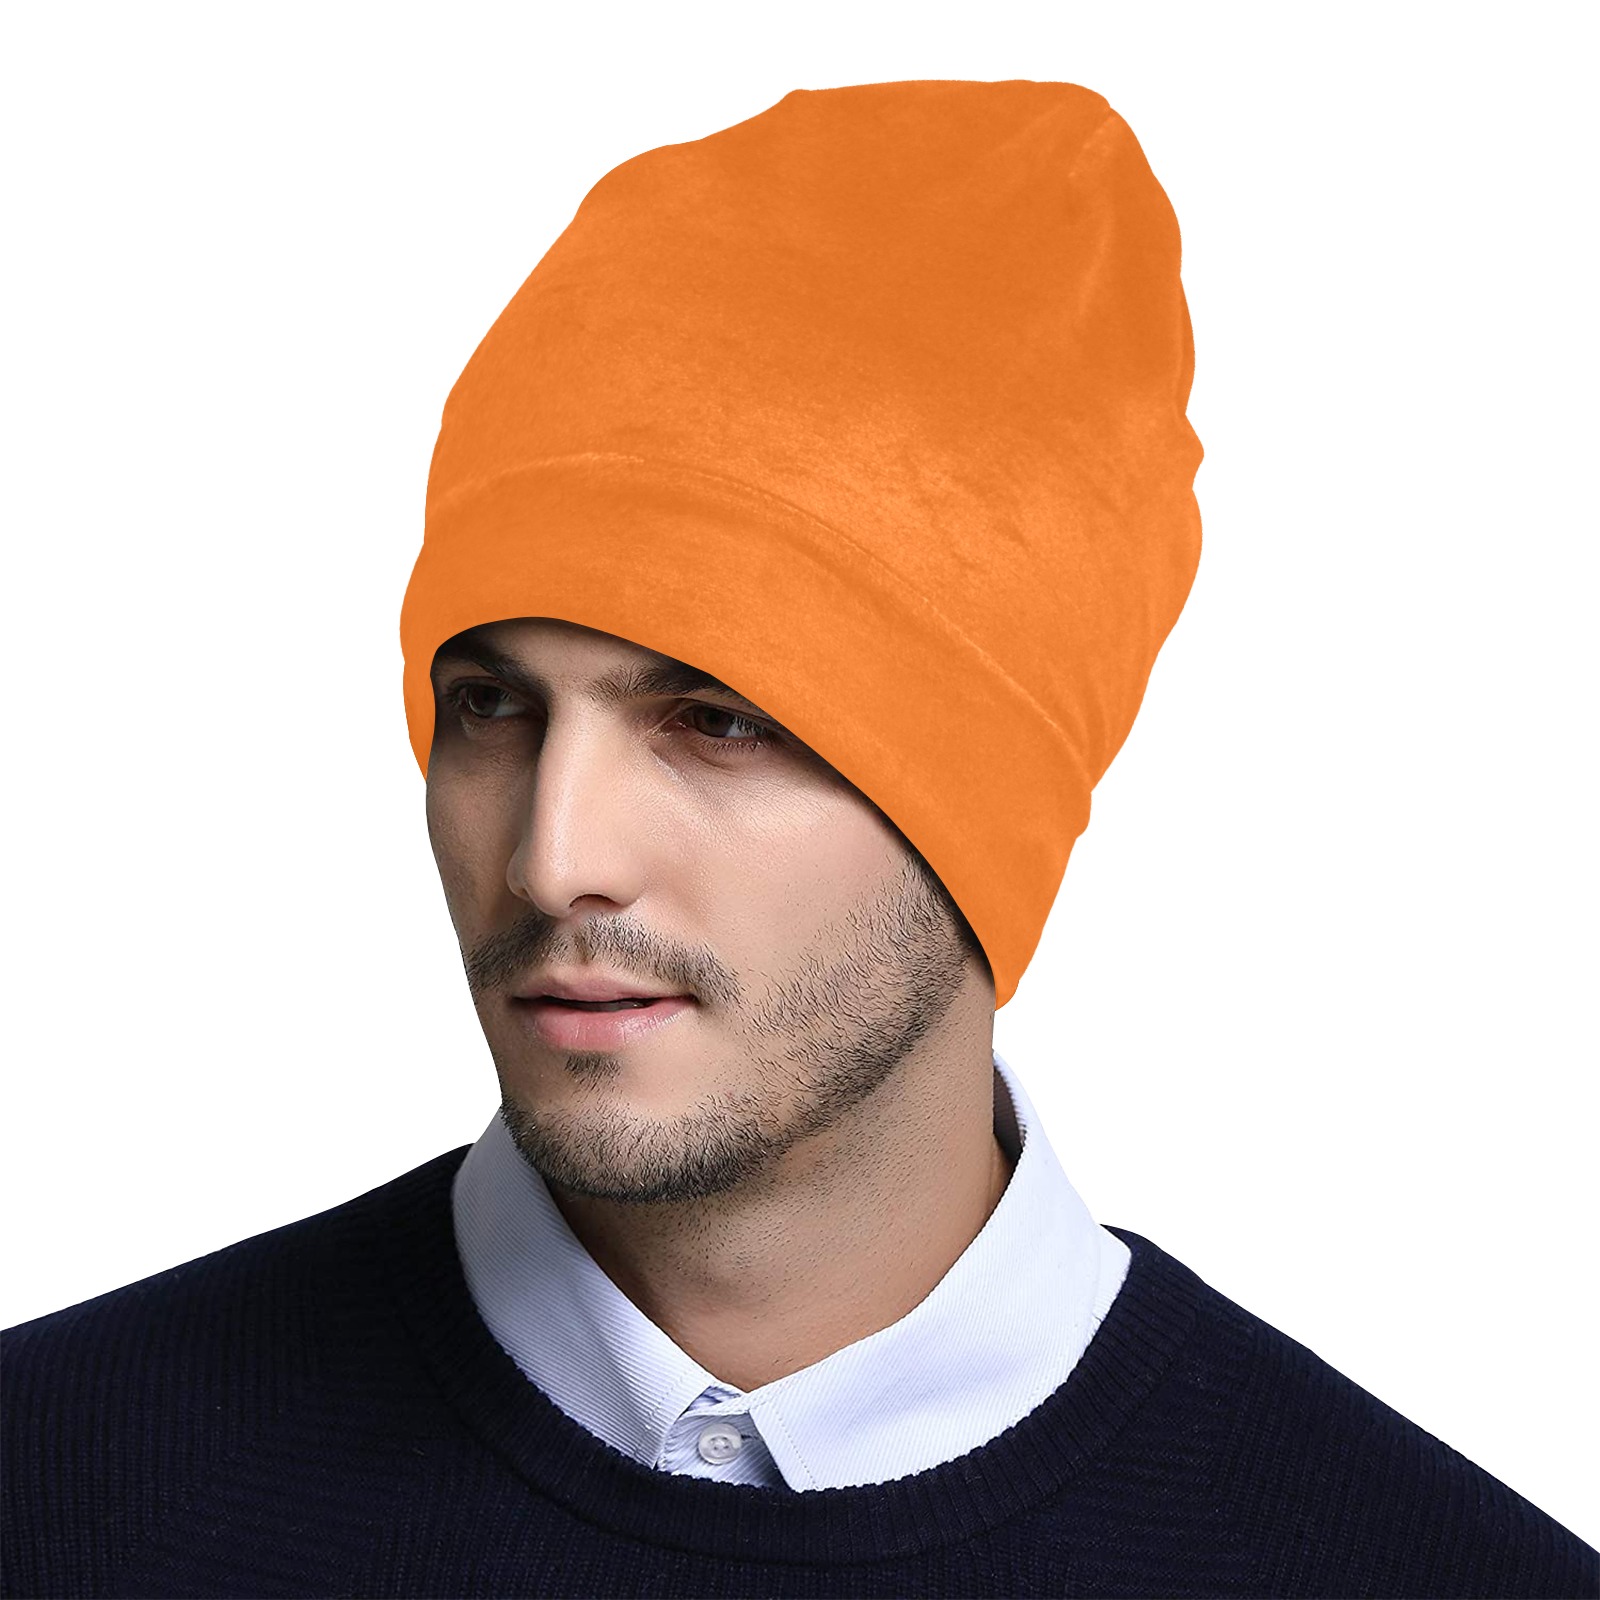 color pumpkin All Over Print Beanie for Adults